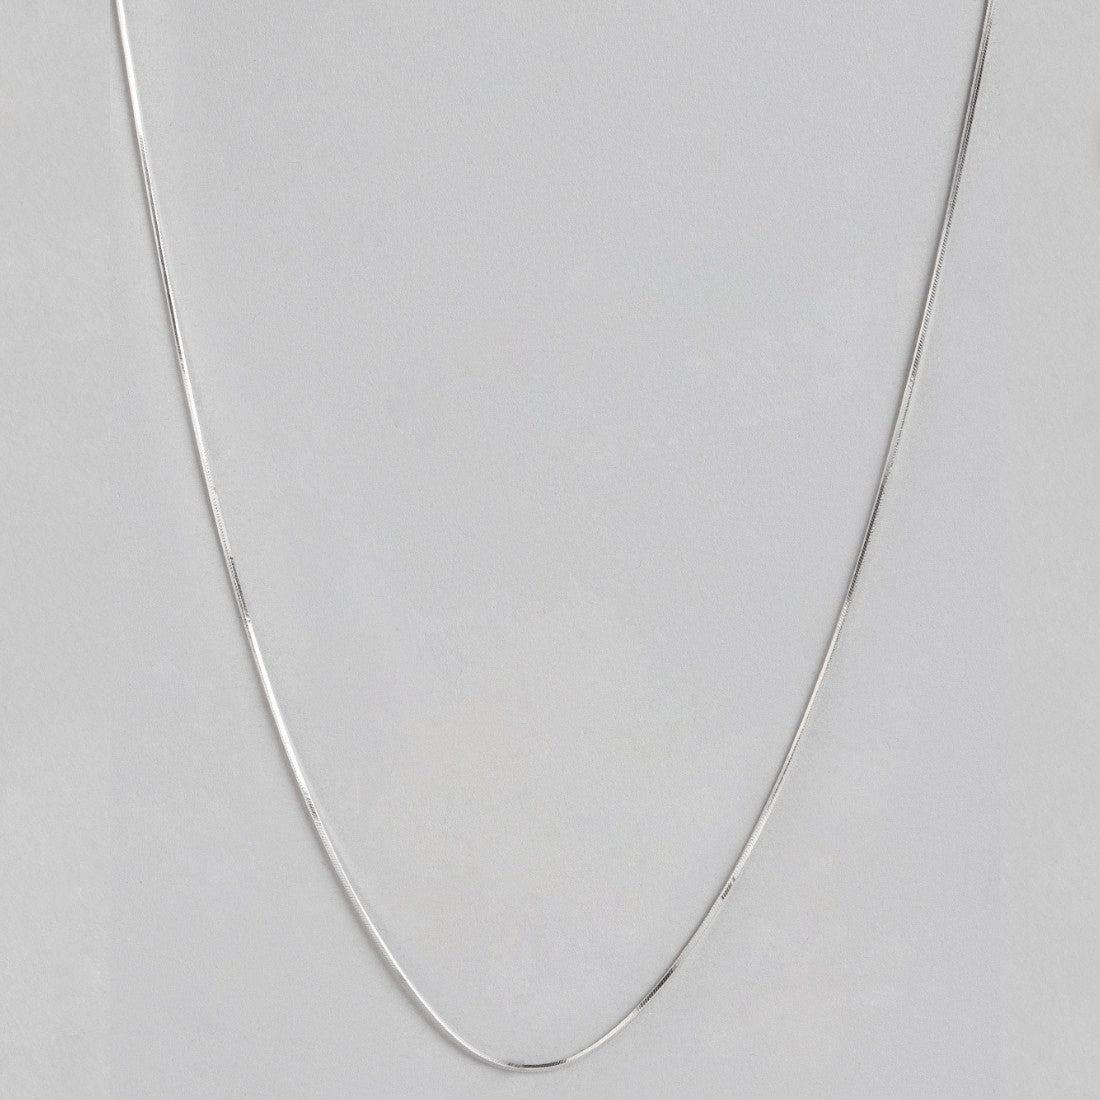 Elegant Serpentine 925 Sterling Silver Silver-Plated Snake Chain